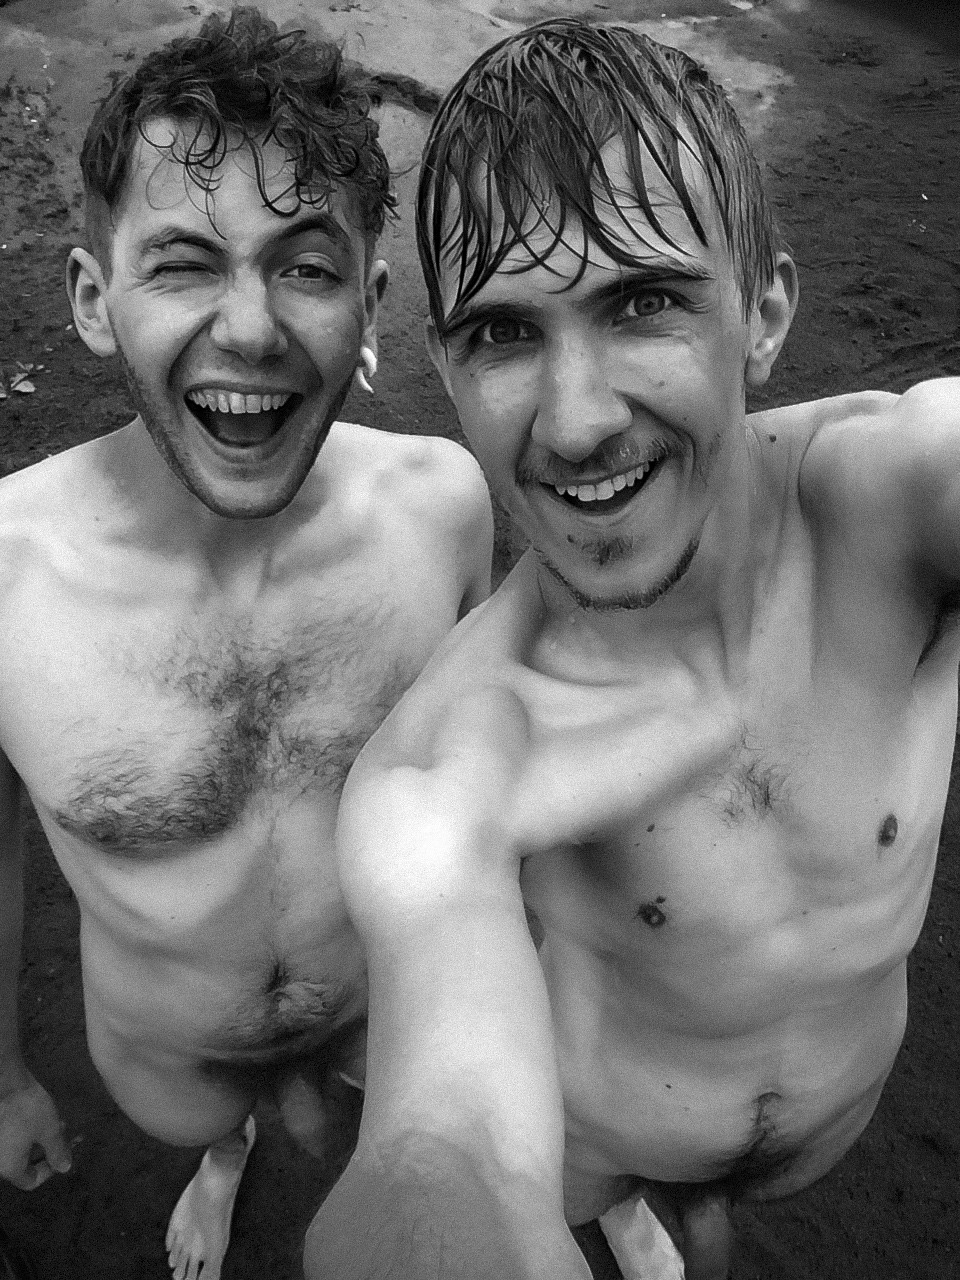 wicked-trousers: wicked-trousers: So we went swimming a couple of days ago, it was